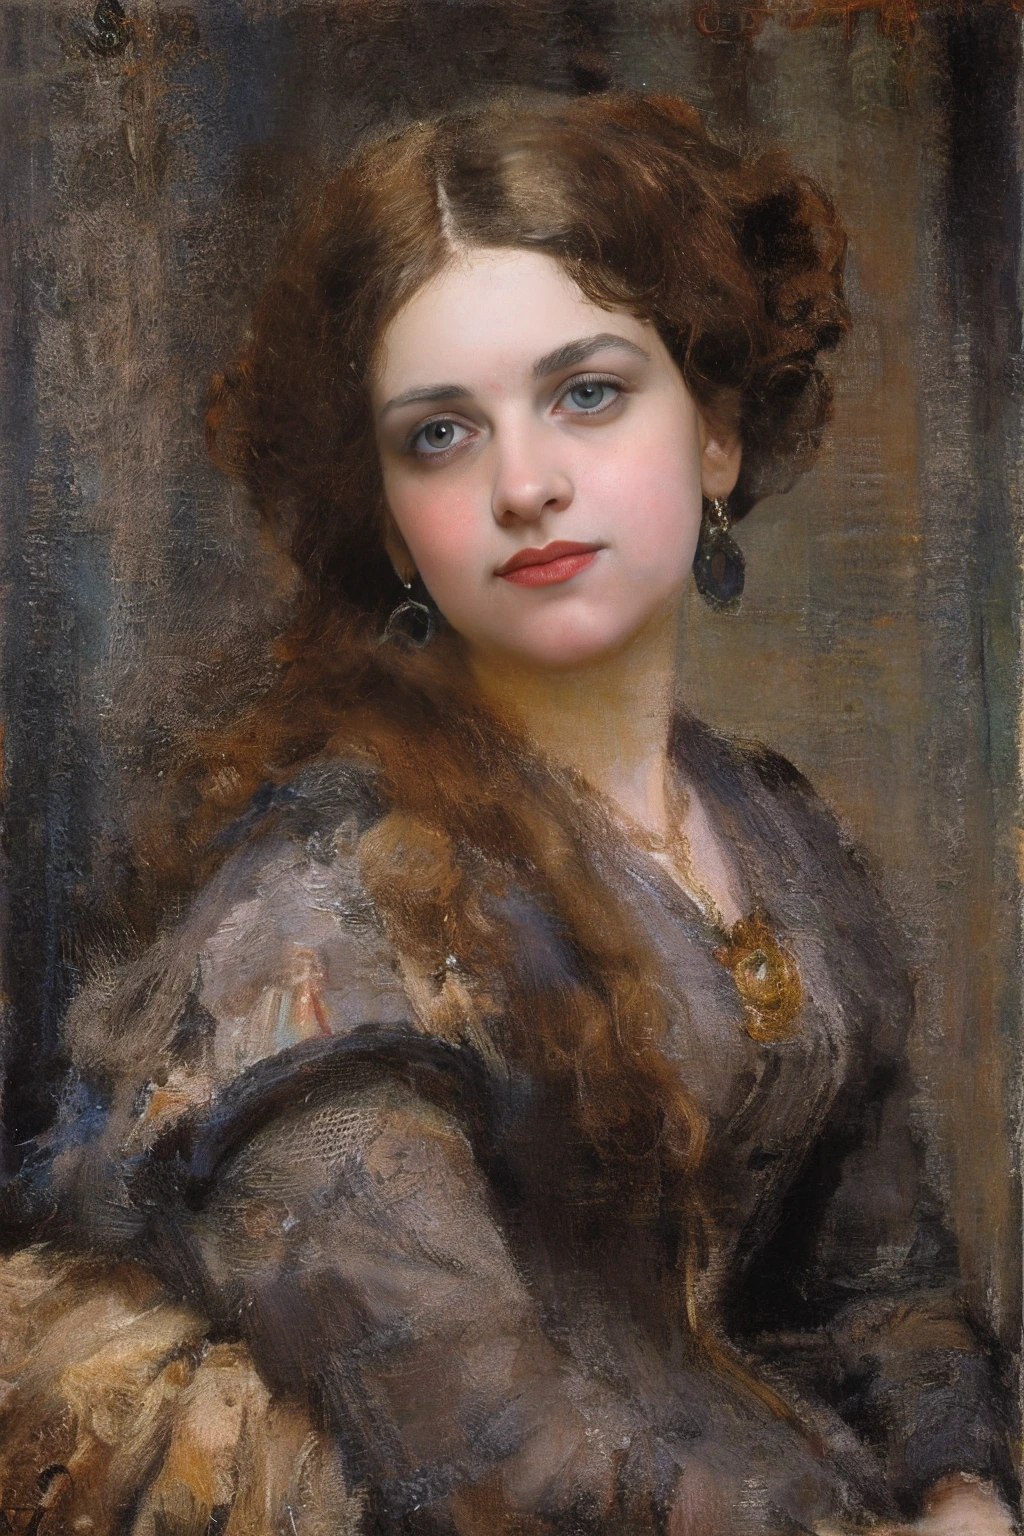 There is a huge painting hanging on the wall：A painting of a woman in a purple dress seated，Charles Sillem Lidderdale，Inspired by Sophie Jambrae Anderson，Julius LeBron Stewart，a beautiful victorian woman，Joseph Noel Paton，Portrait of a Victorian woman，Charles Joshua Chaplin，Sophie Genbre Anderson，Inspired by Julius LeBron Stewart，princess portrait，victorian painting，Victorian ladies